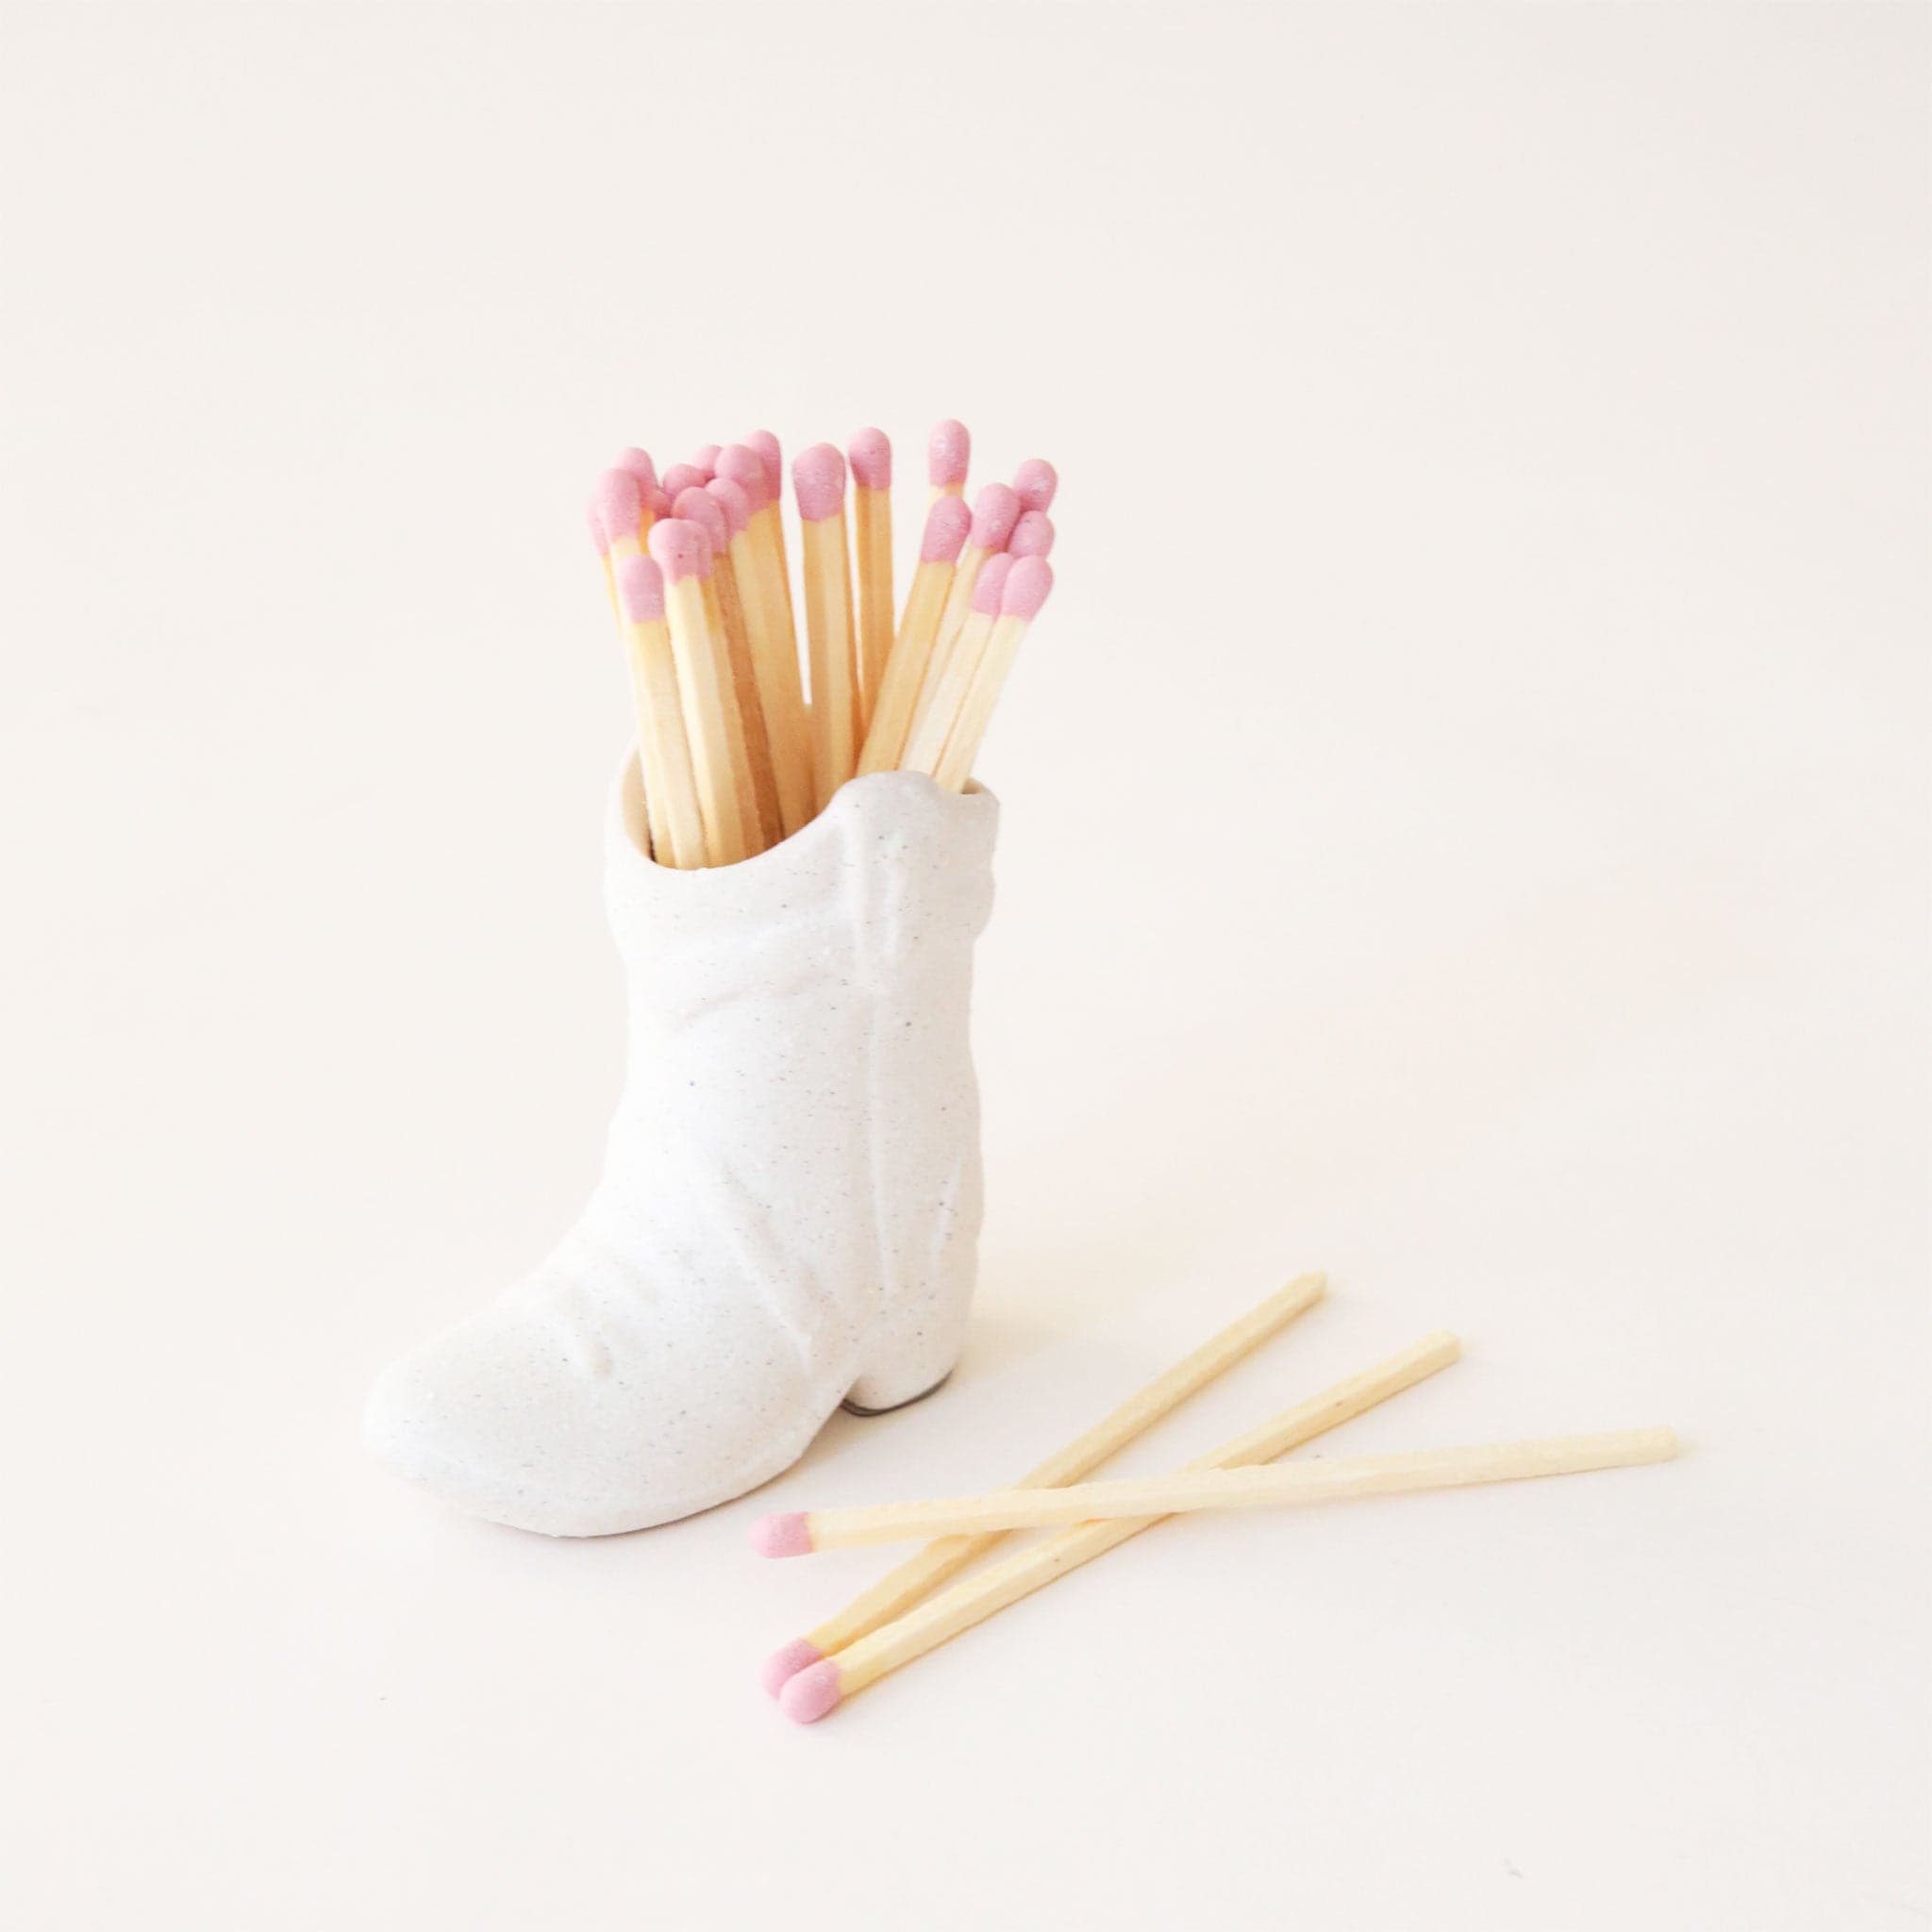 On a white background is a white cowgirl boot shaped match holder with pink matches inside. 